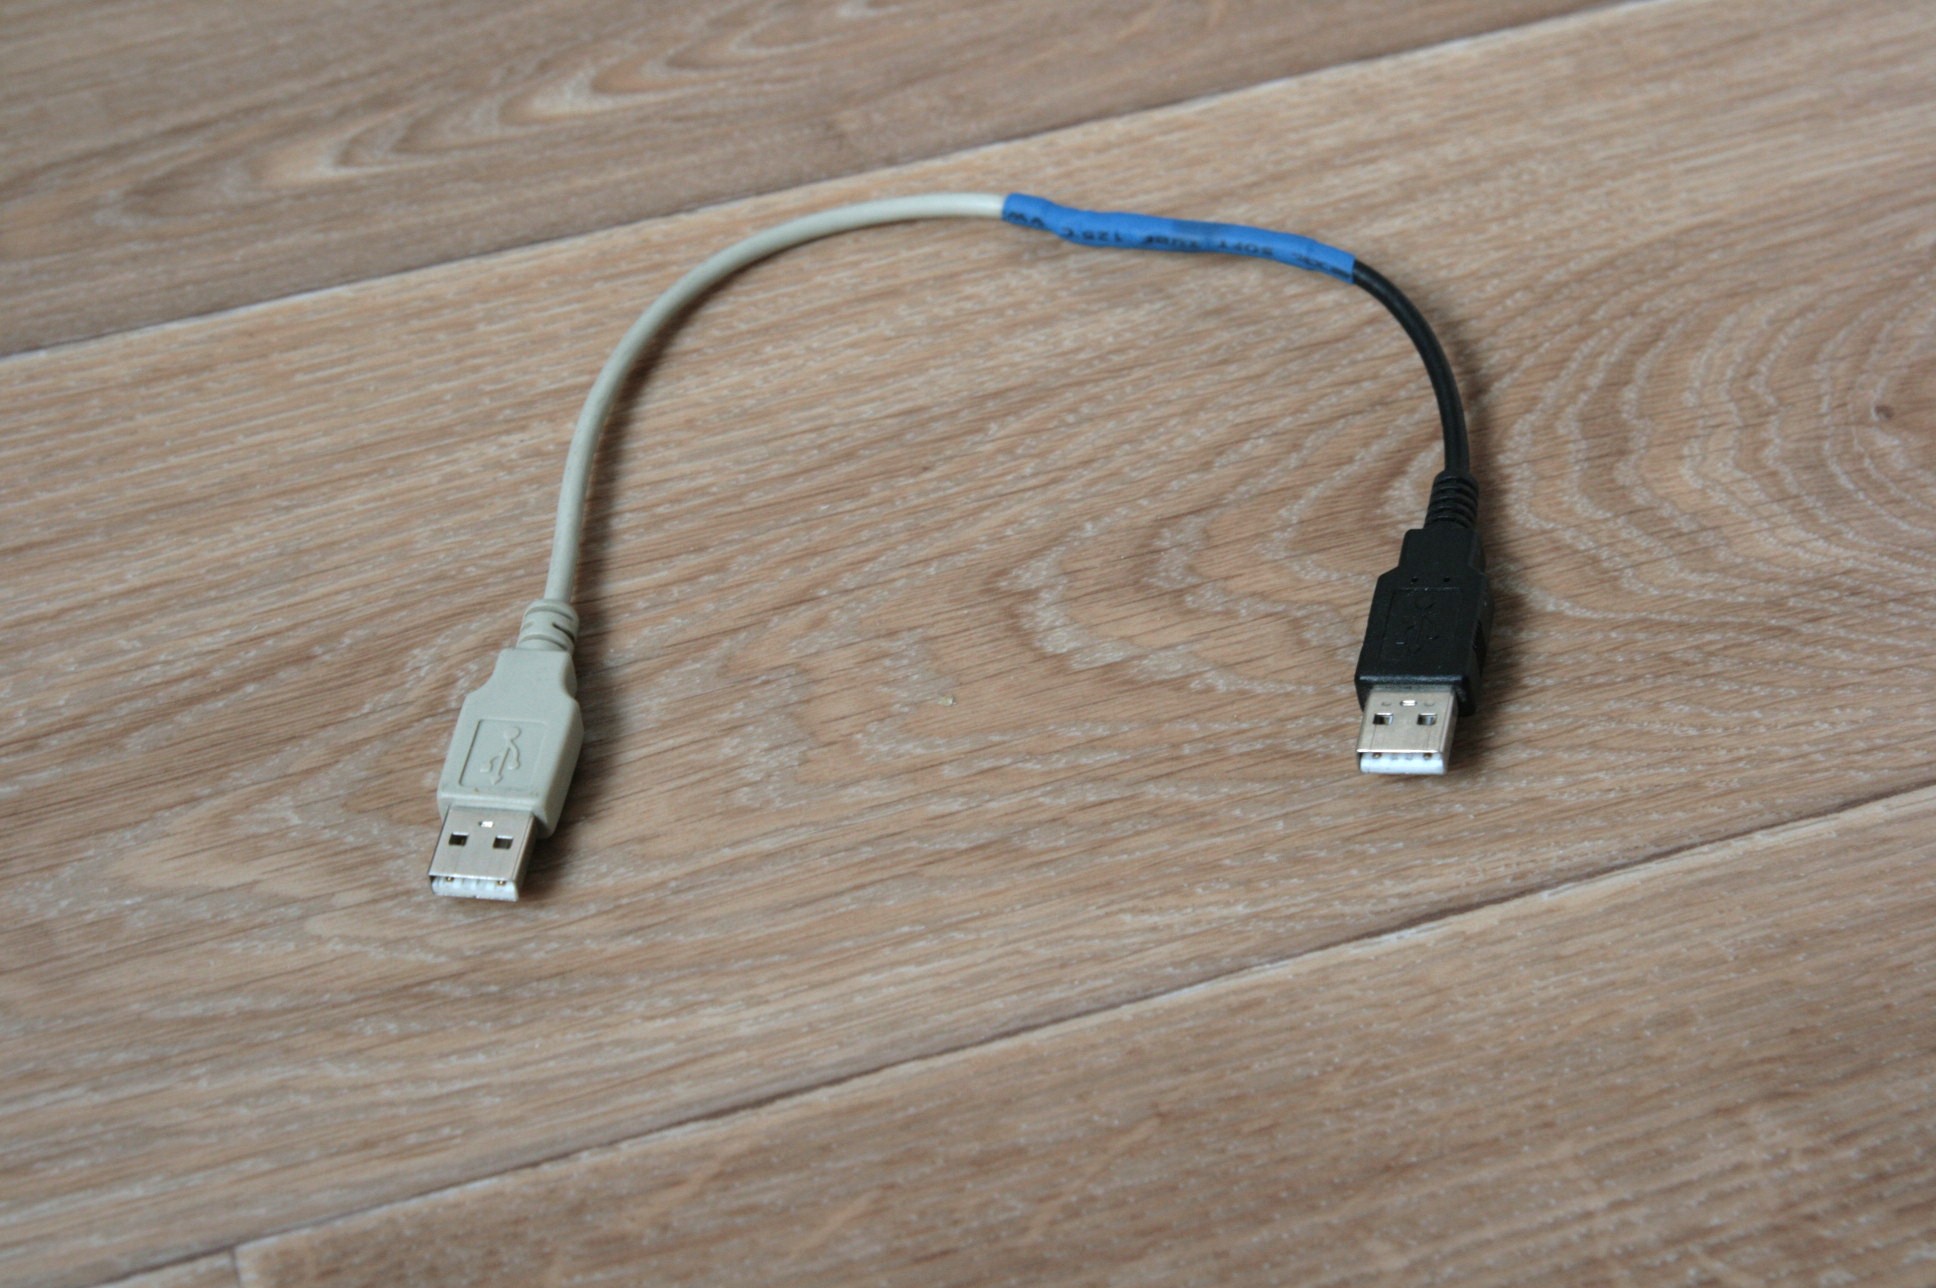 USB A to USB A cable